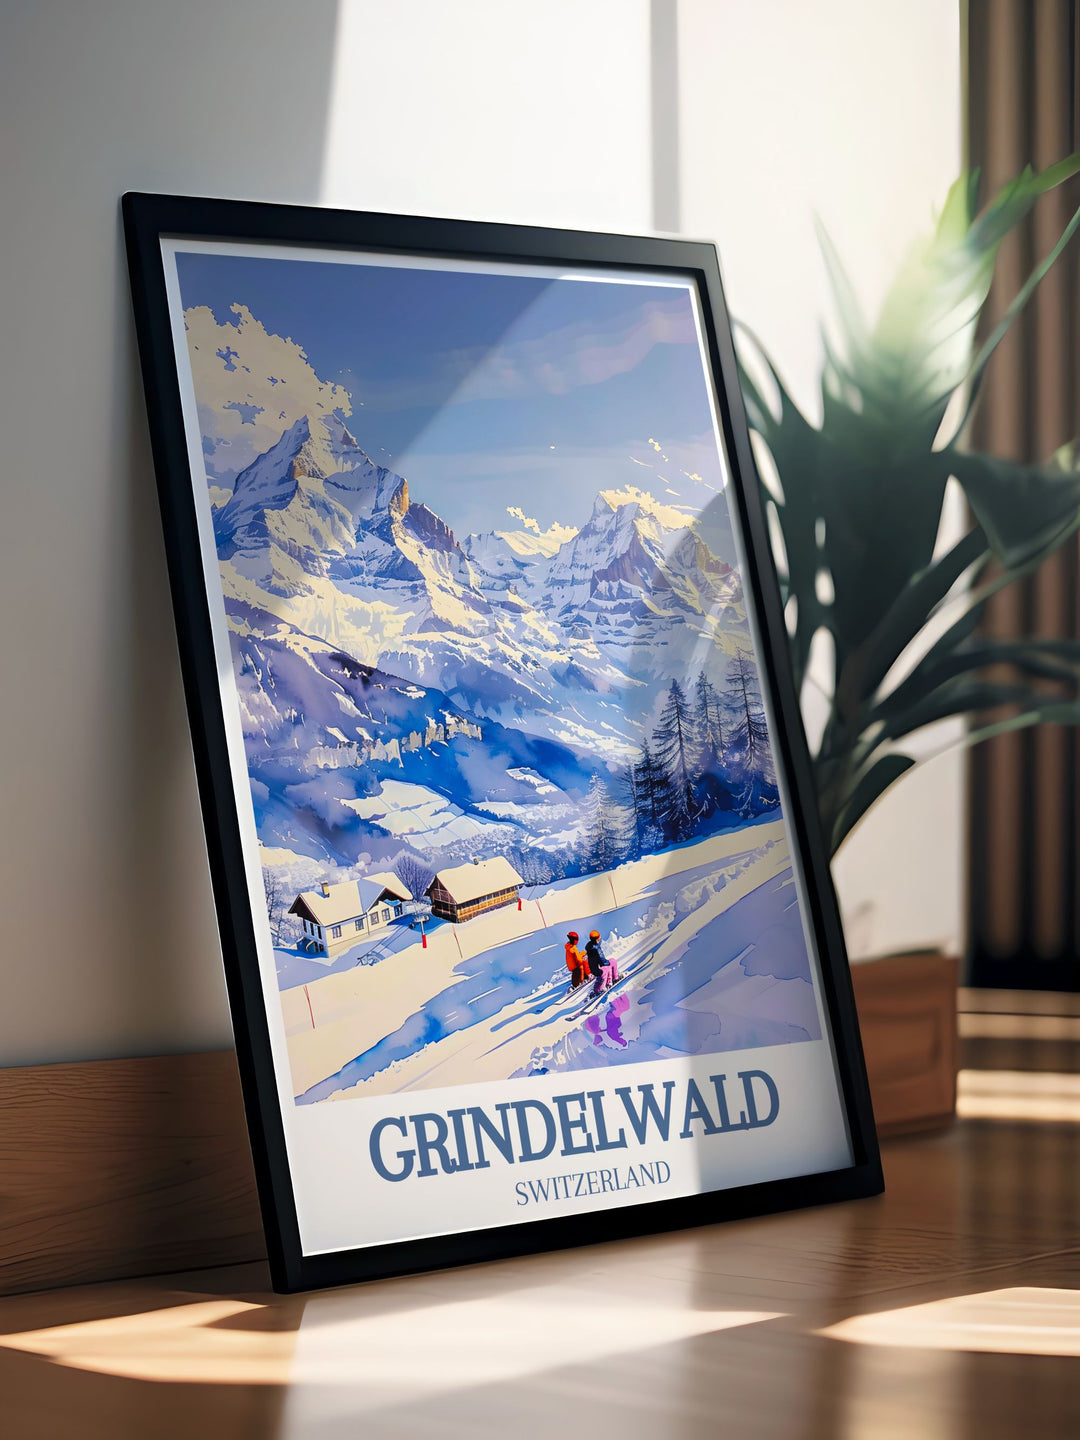 An intricate depiction of the Swiss Alps, this art print highlights the natural grandeur and serene beauty of Grindelwald, bringing the majestic scenery into your living space.